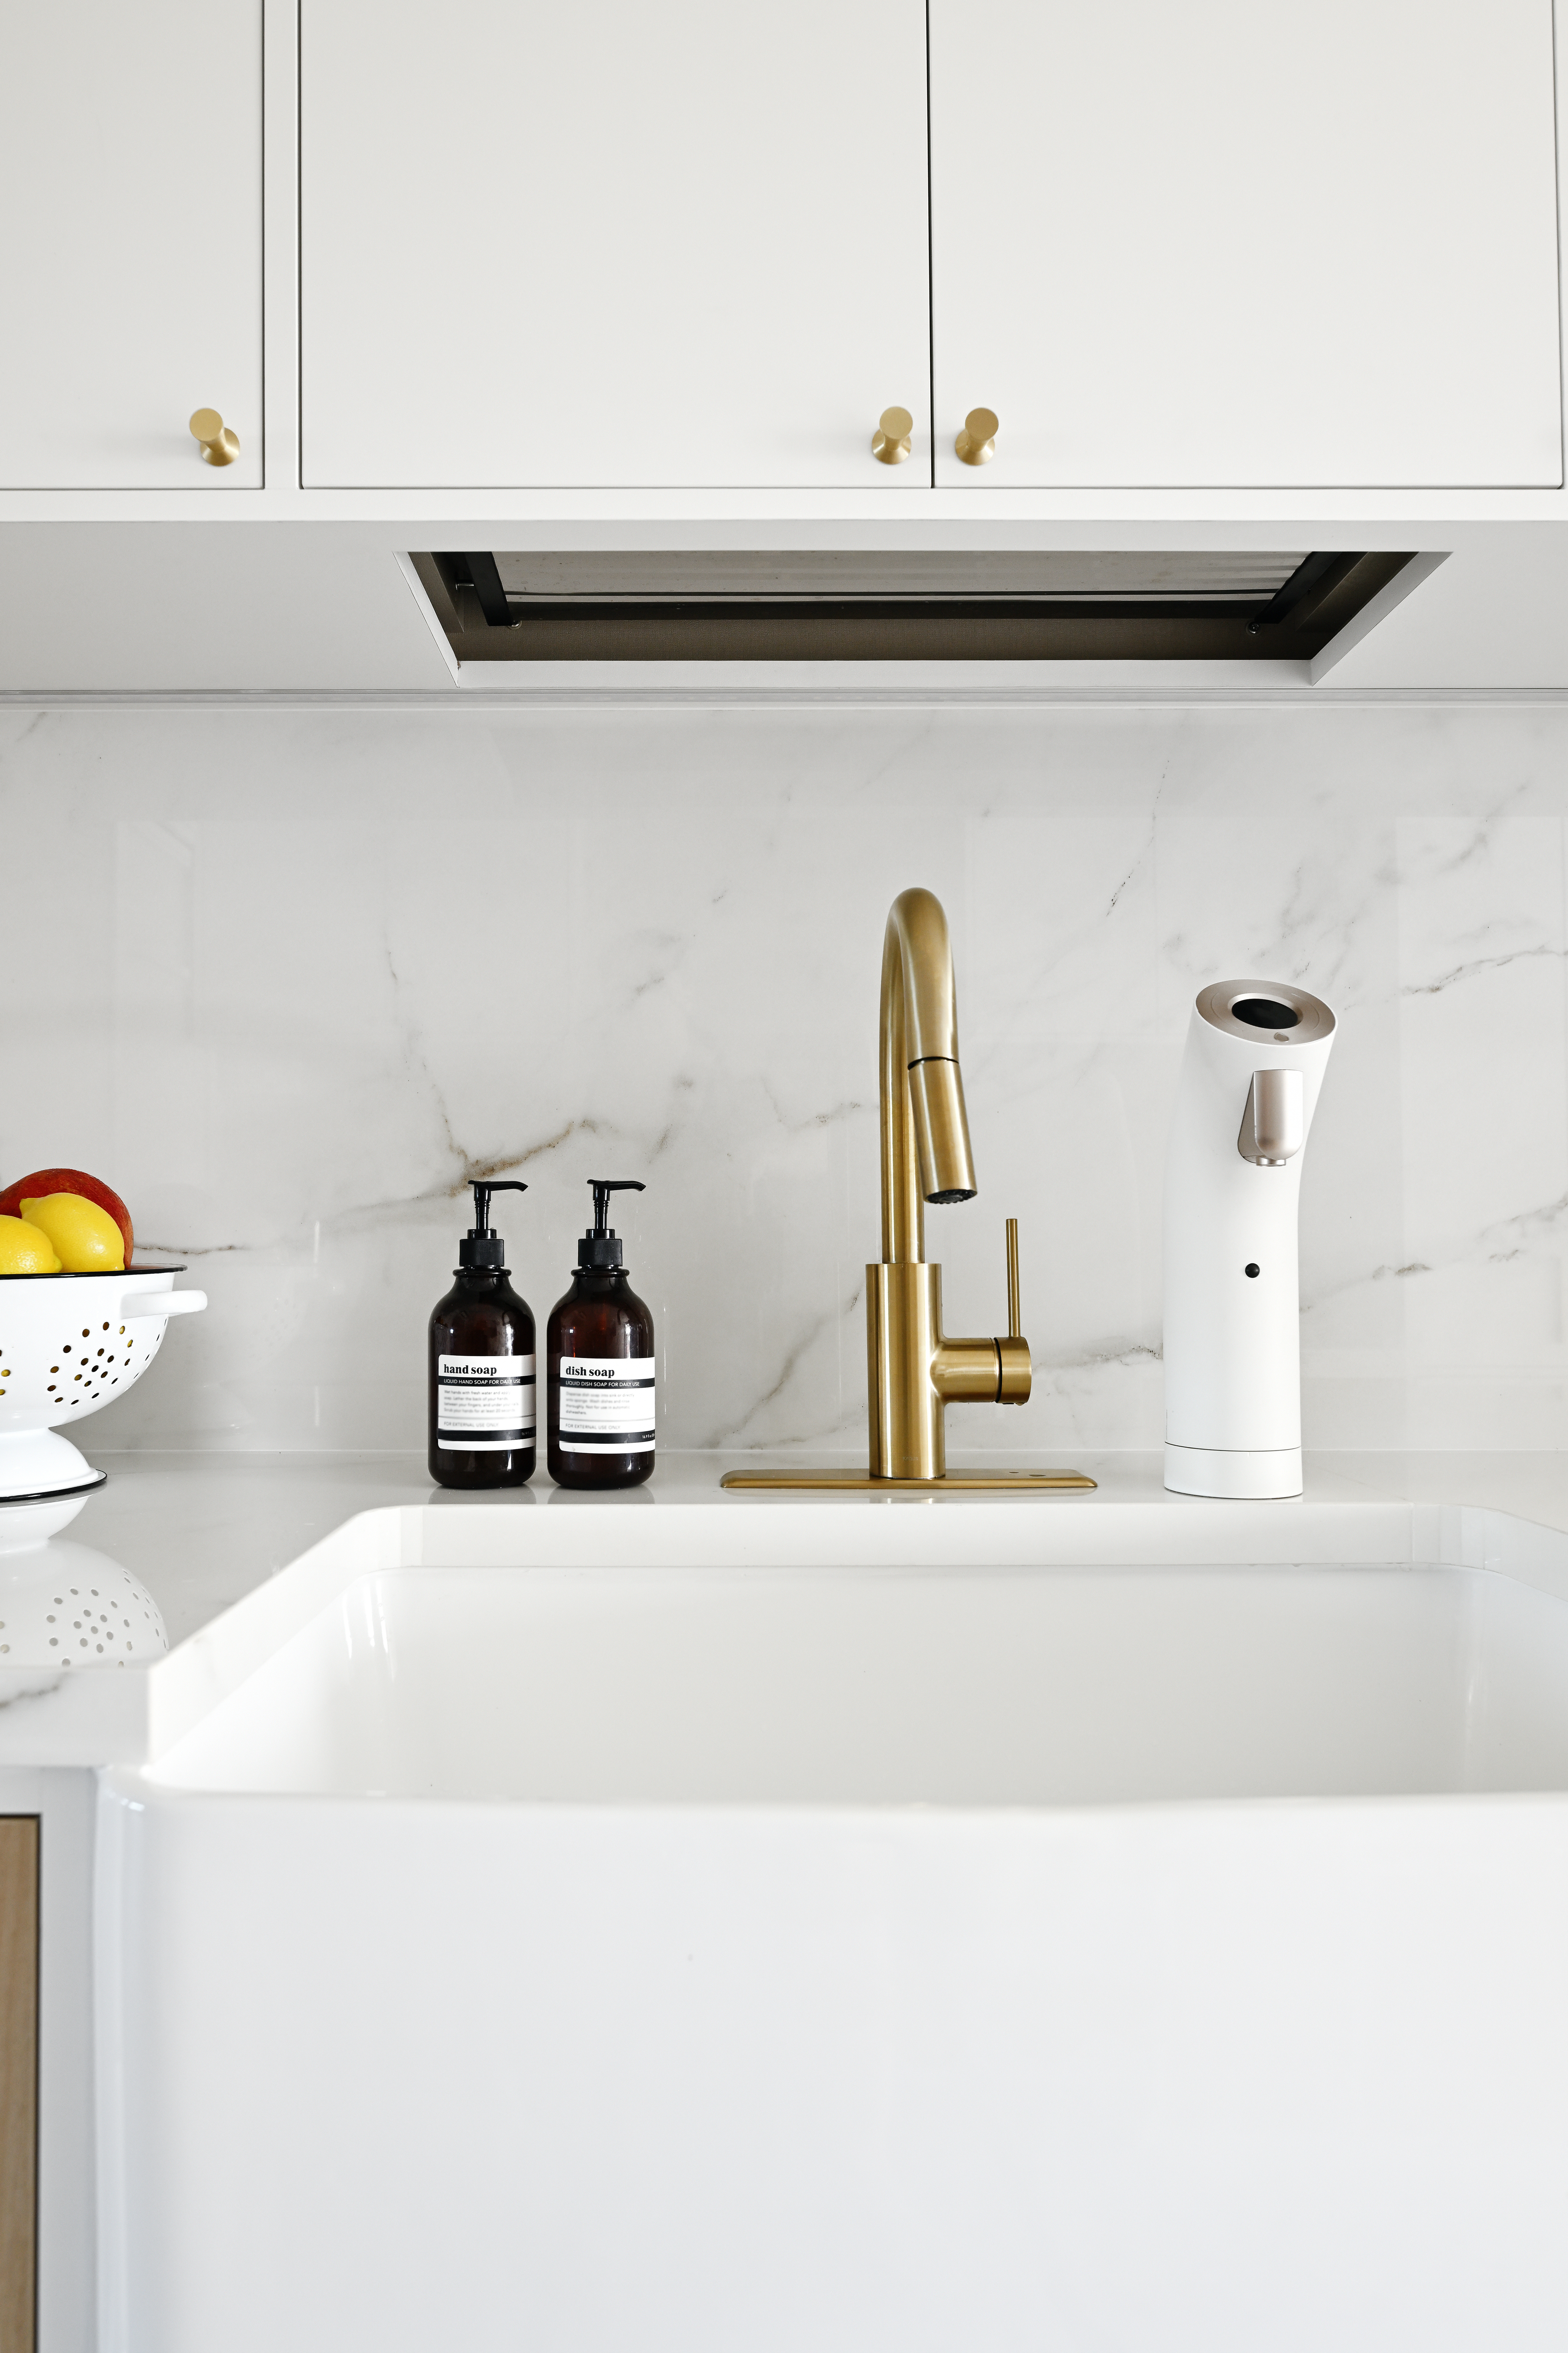 Large, modern kitchen sink with gold faucet, soap dispensers, and fruit bowl on the counter